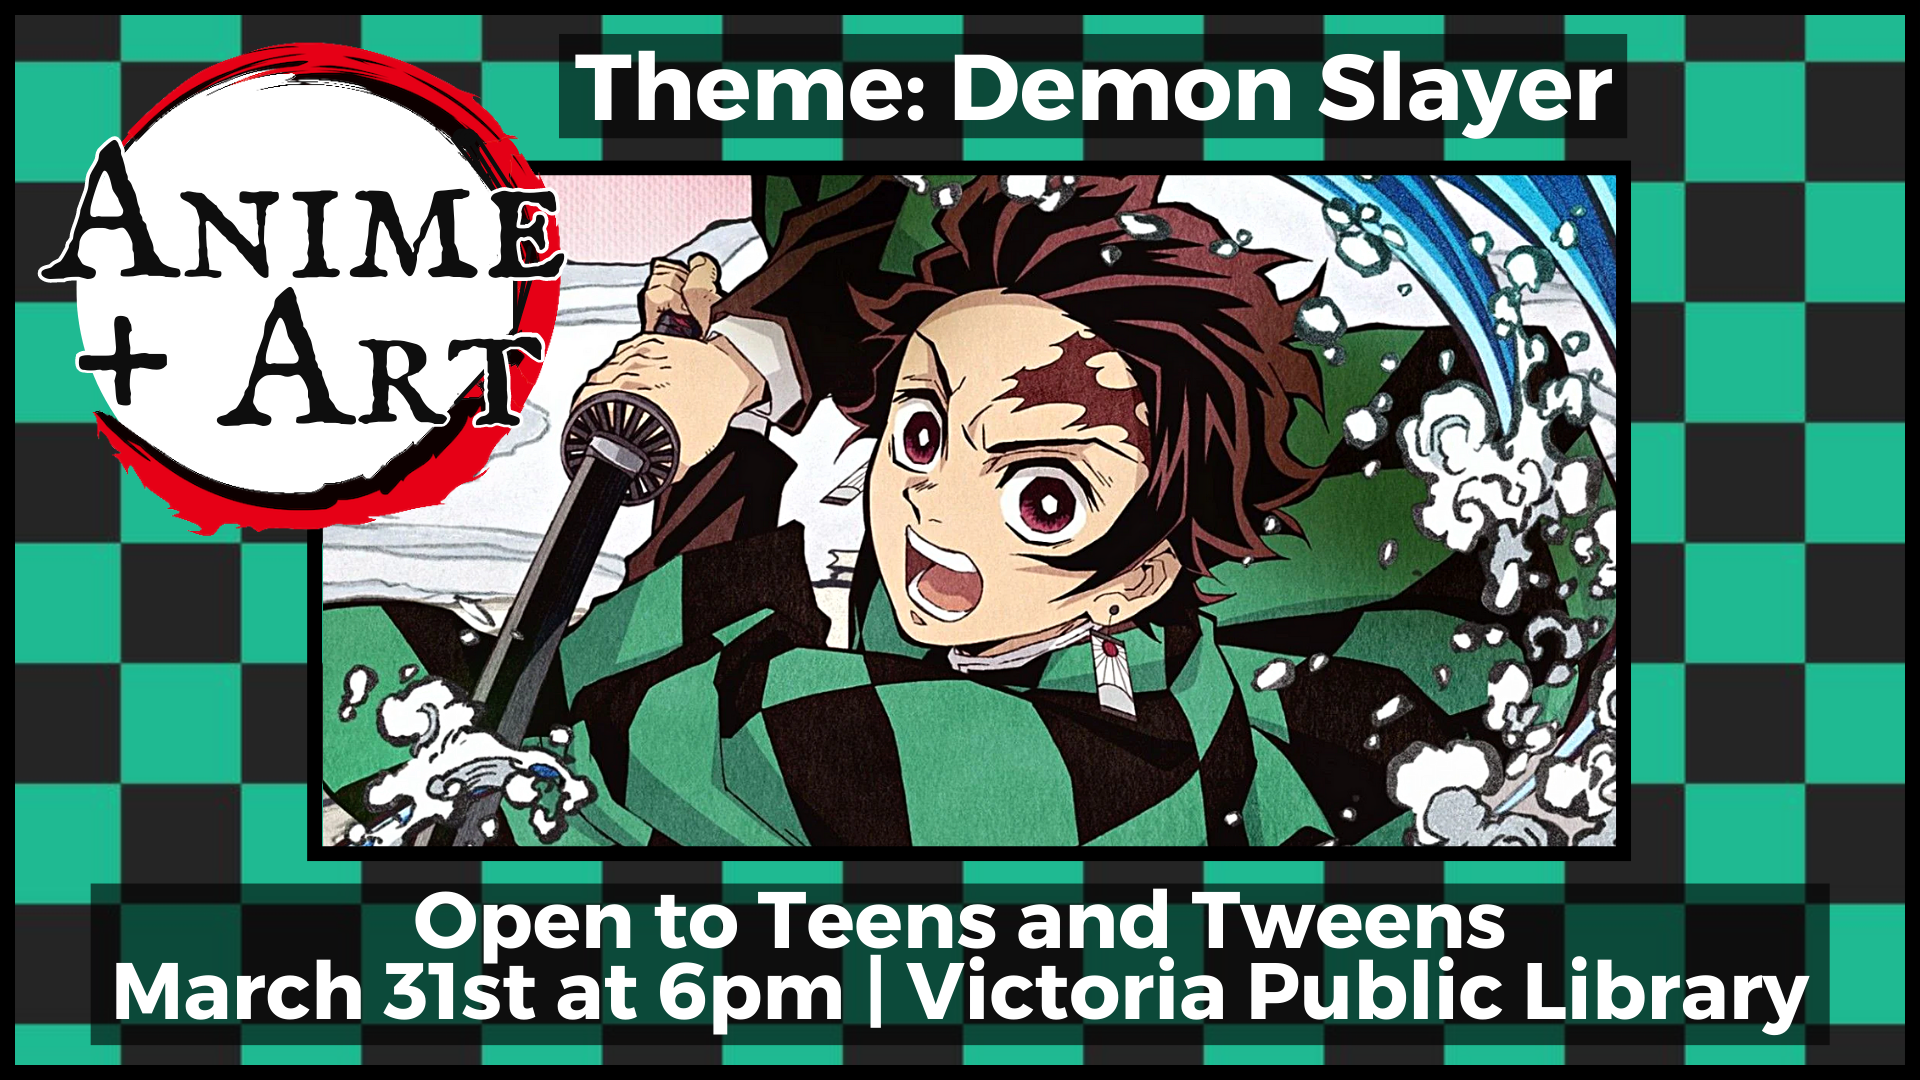 Anime and Art, March 31st at 6pm